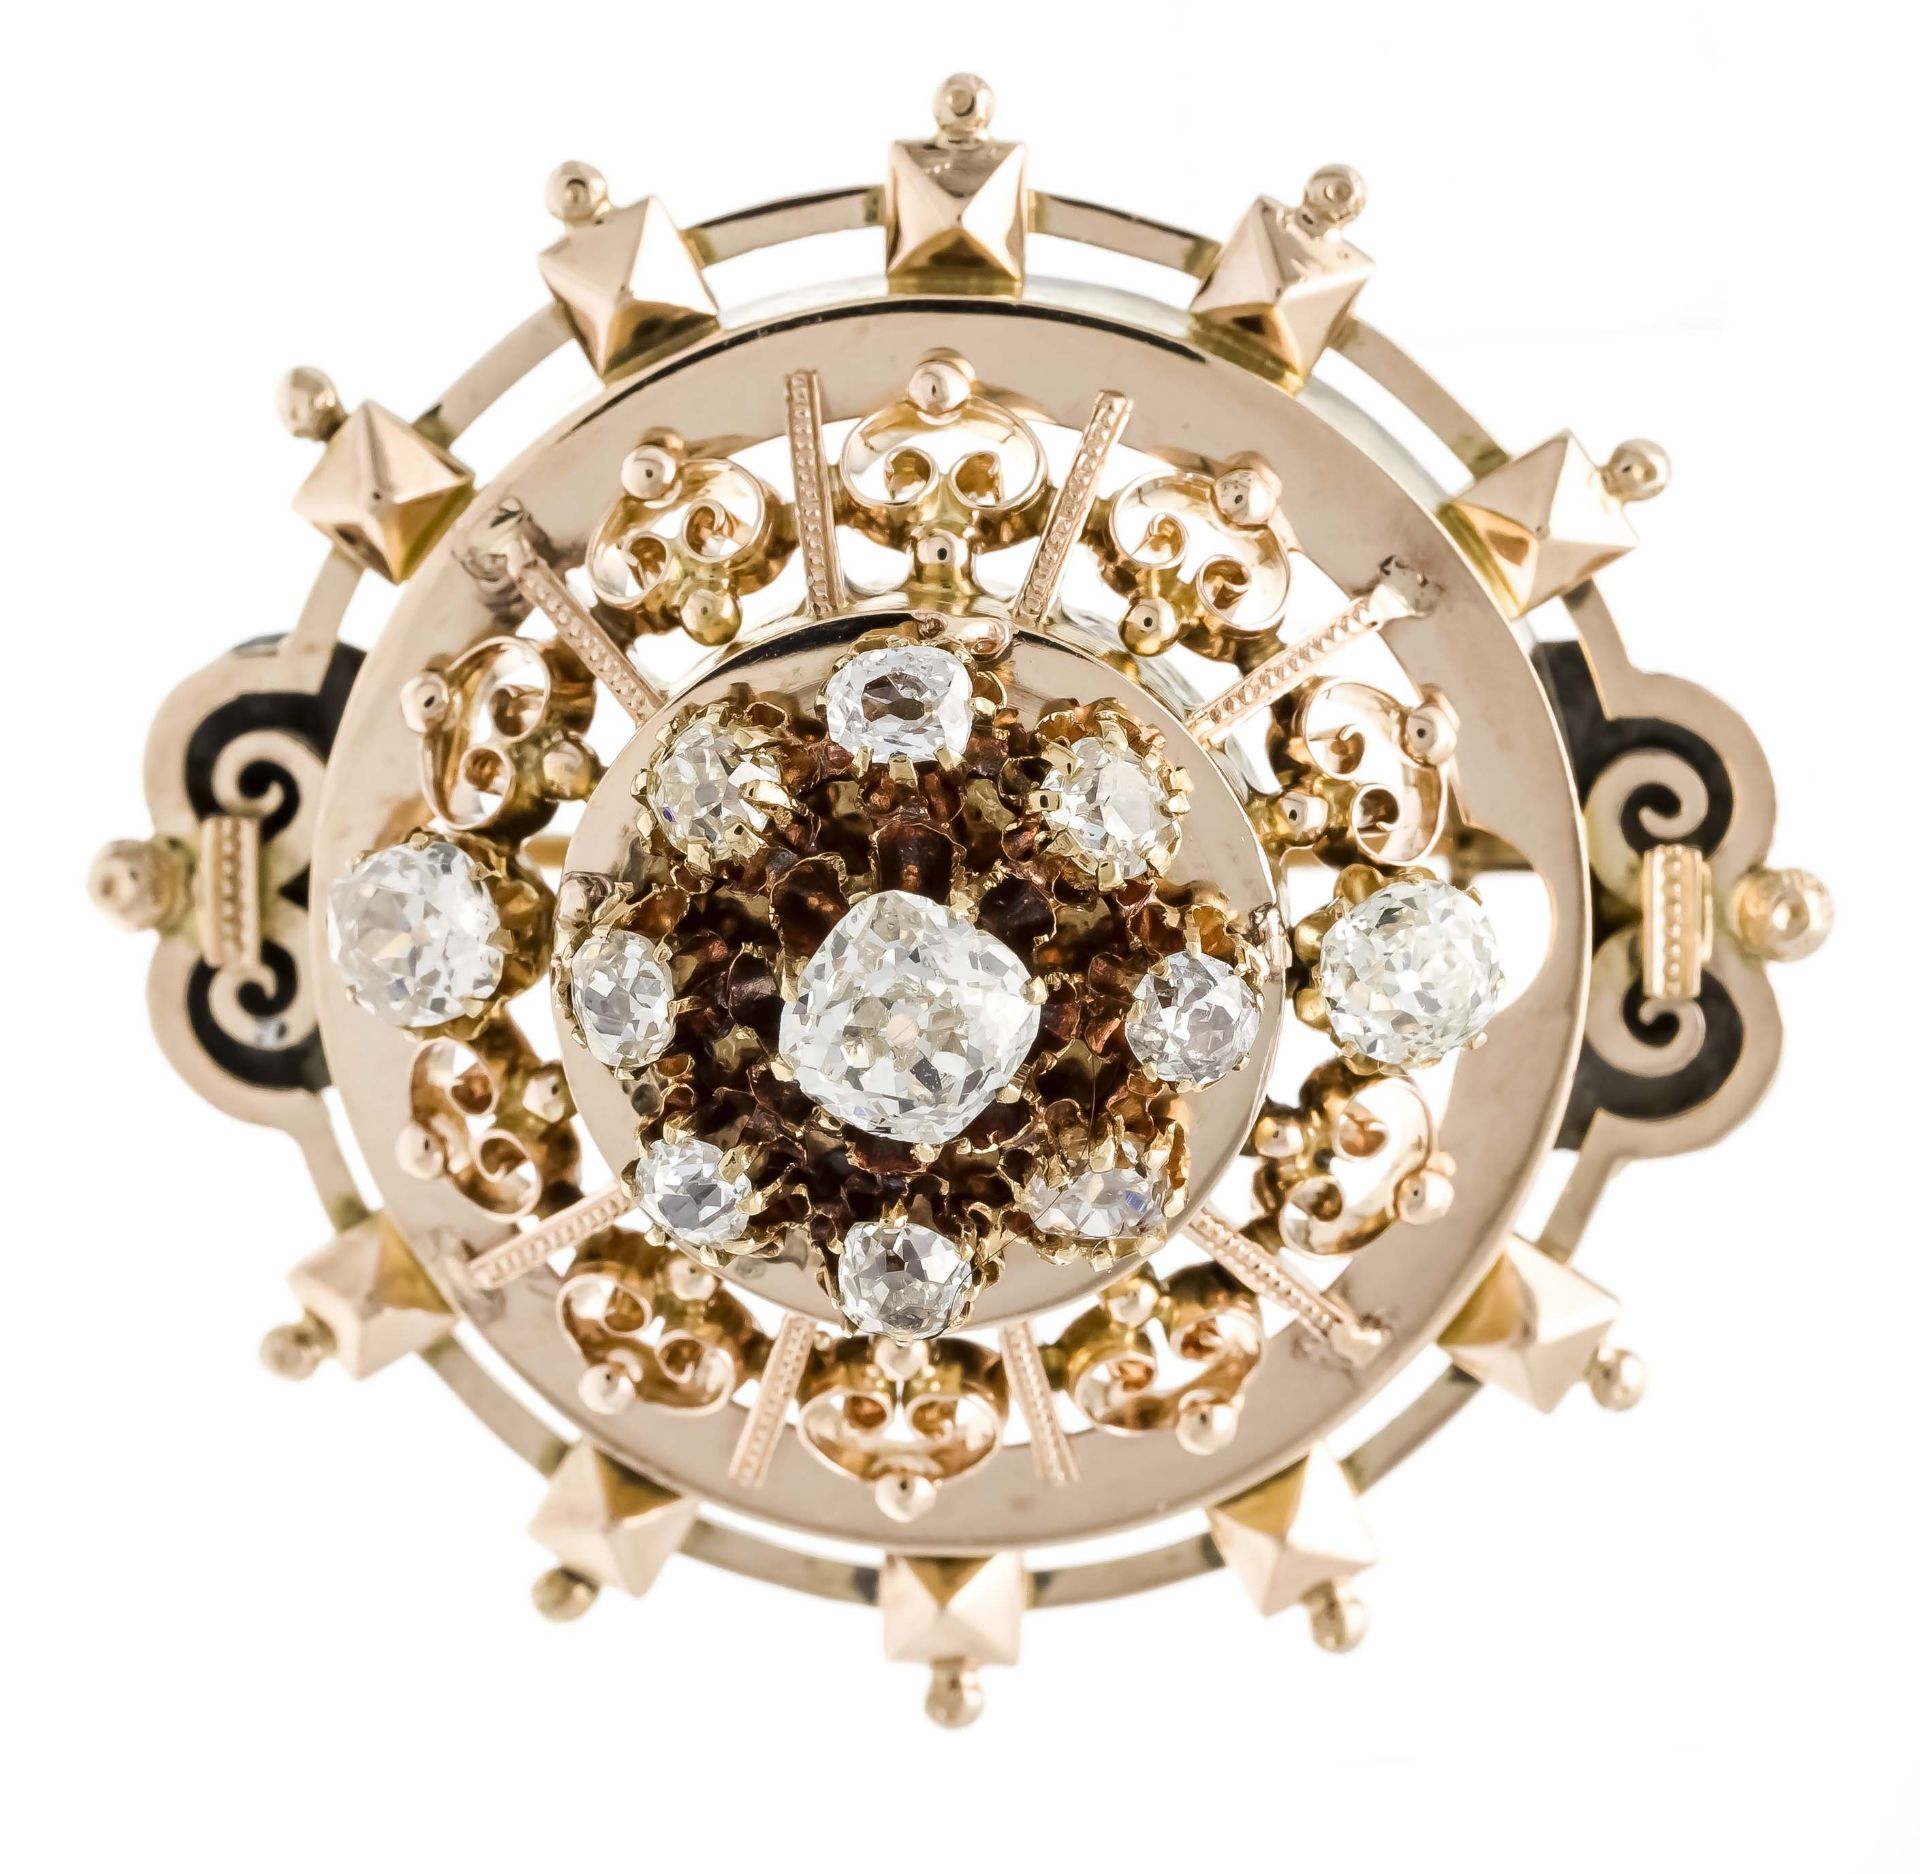 Old-cut diamond brooch RG 585/00 with an old-cut diamond 0.68 ct fine white to white (G-H) and 10